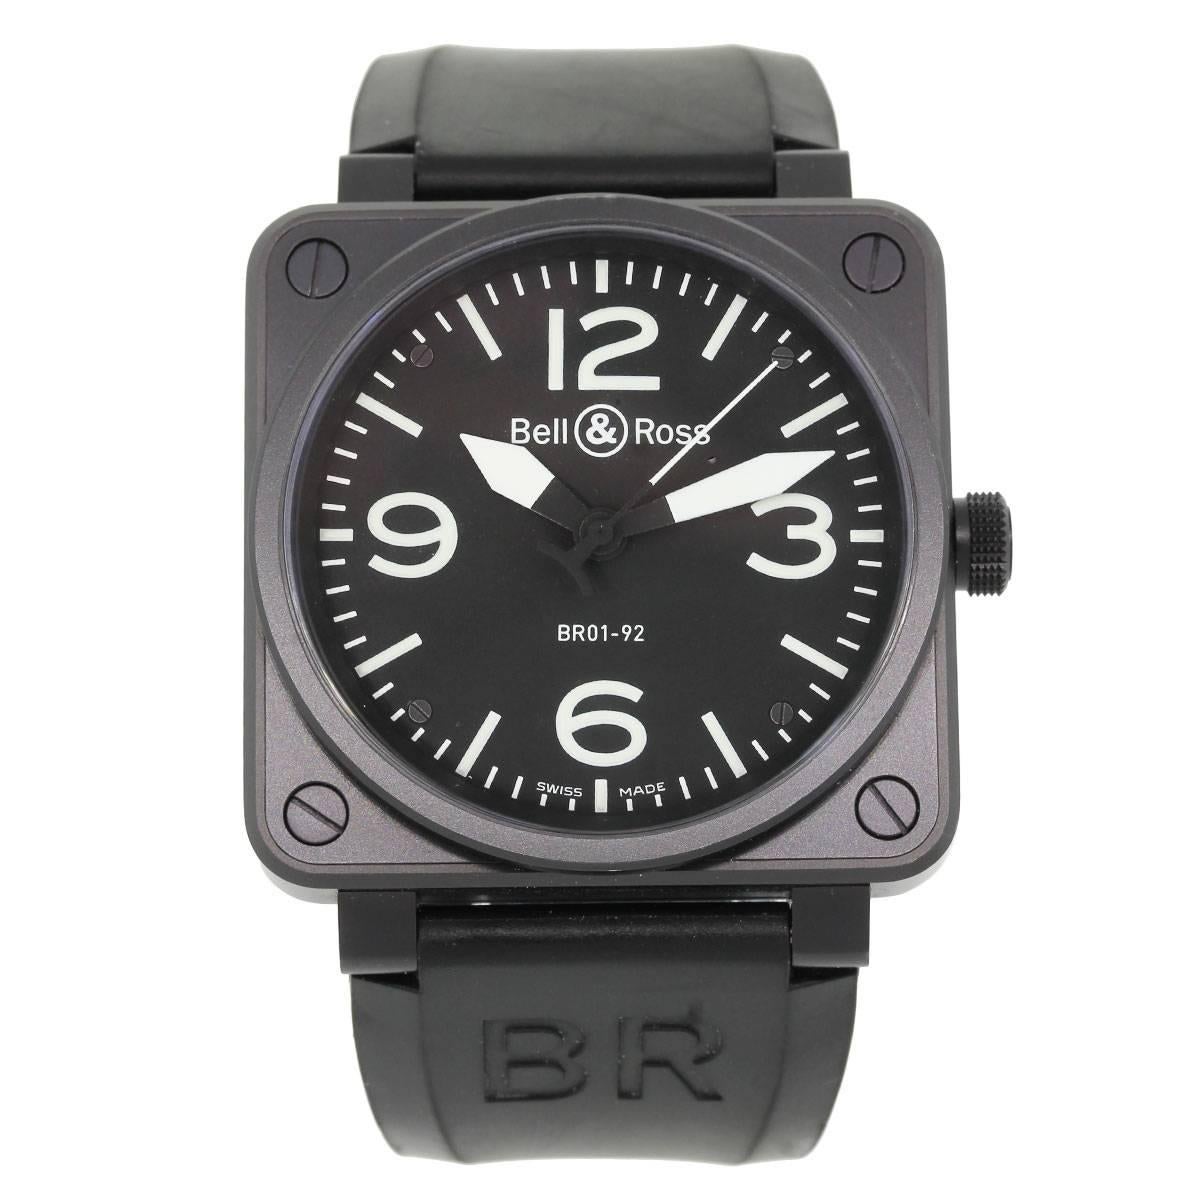 Brand: Bell & Ross
MPN: BR01-92-S-08167
Model: Carbon
Case Material: Stainless steel with black PVD
Case Diameter: 46mm
Crystal: Scratch resistant sapphire
Bezel: Stainless steel with black PVD
Dial: Black dial with luminescent hour markers and